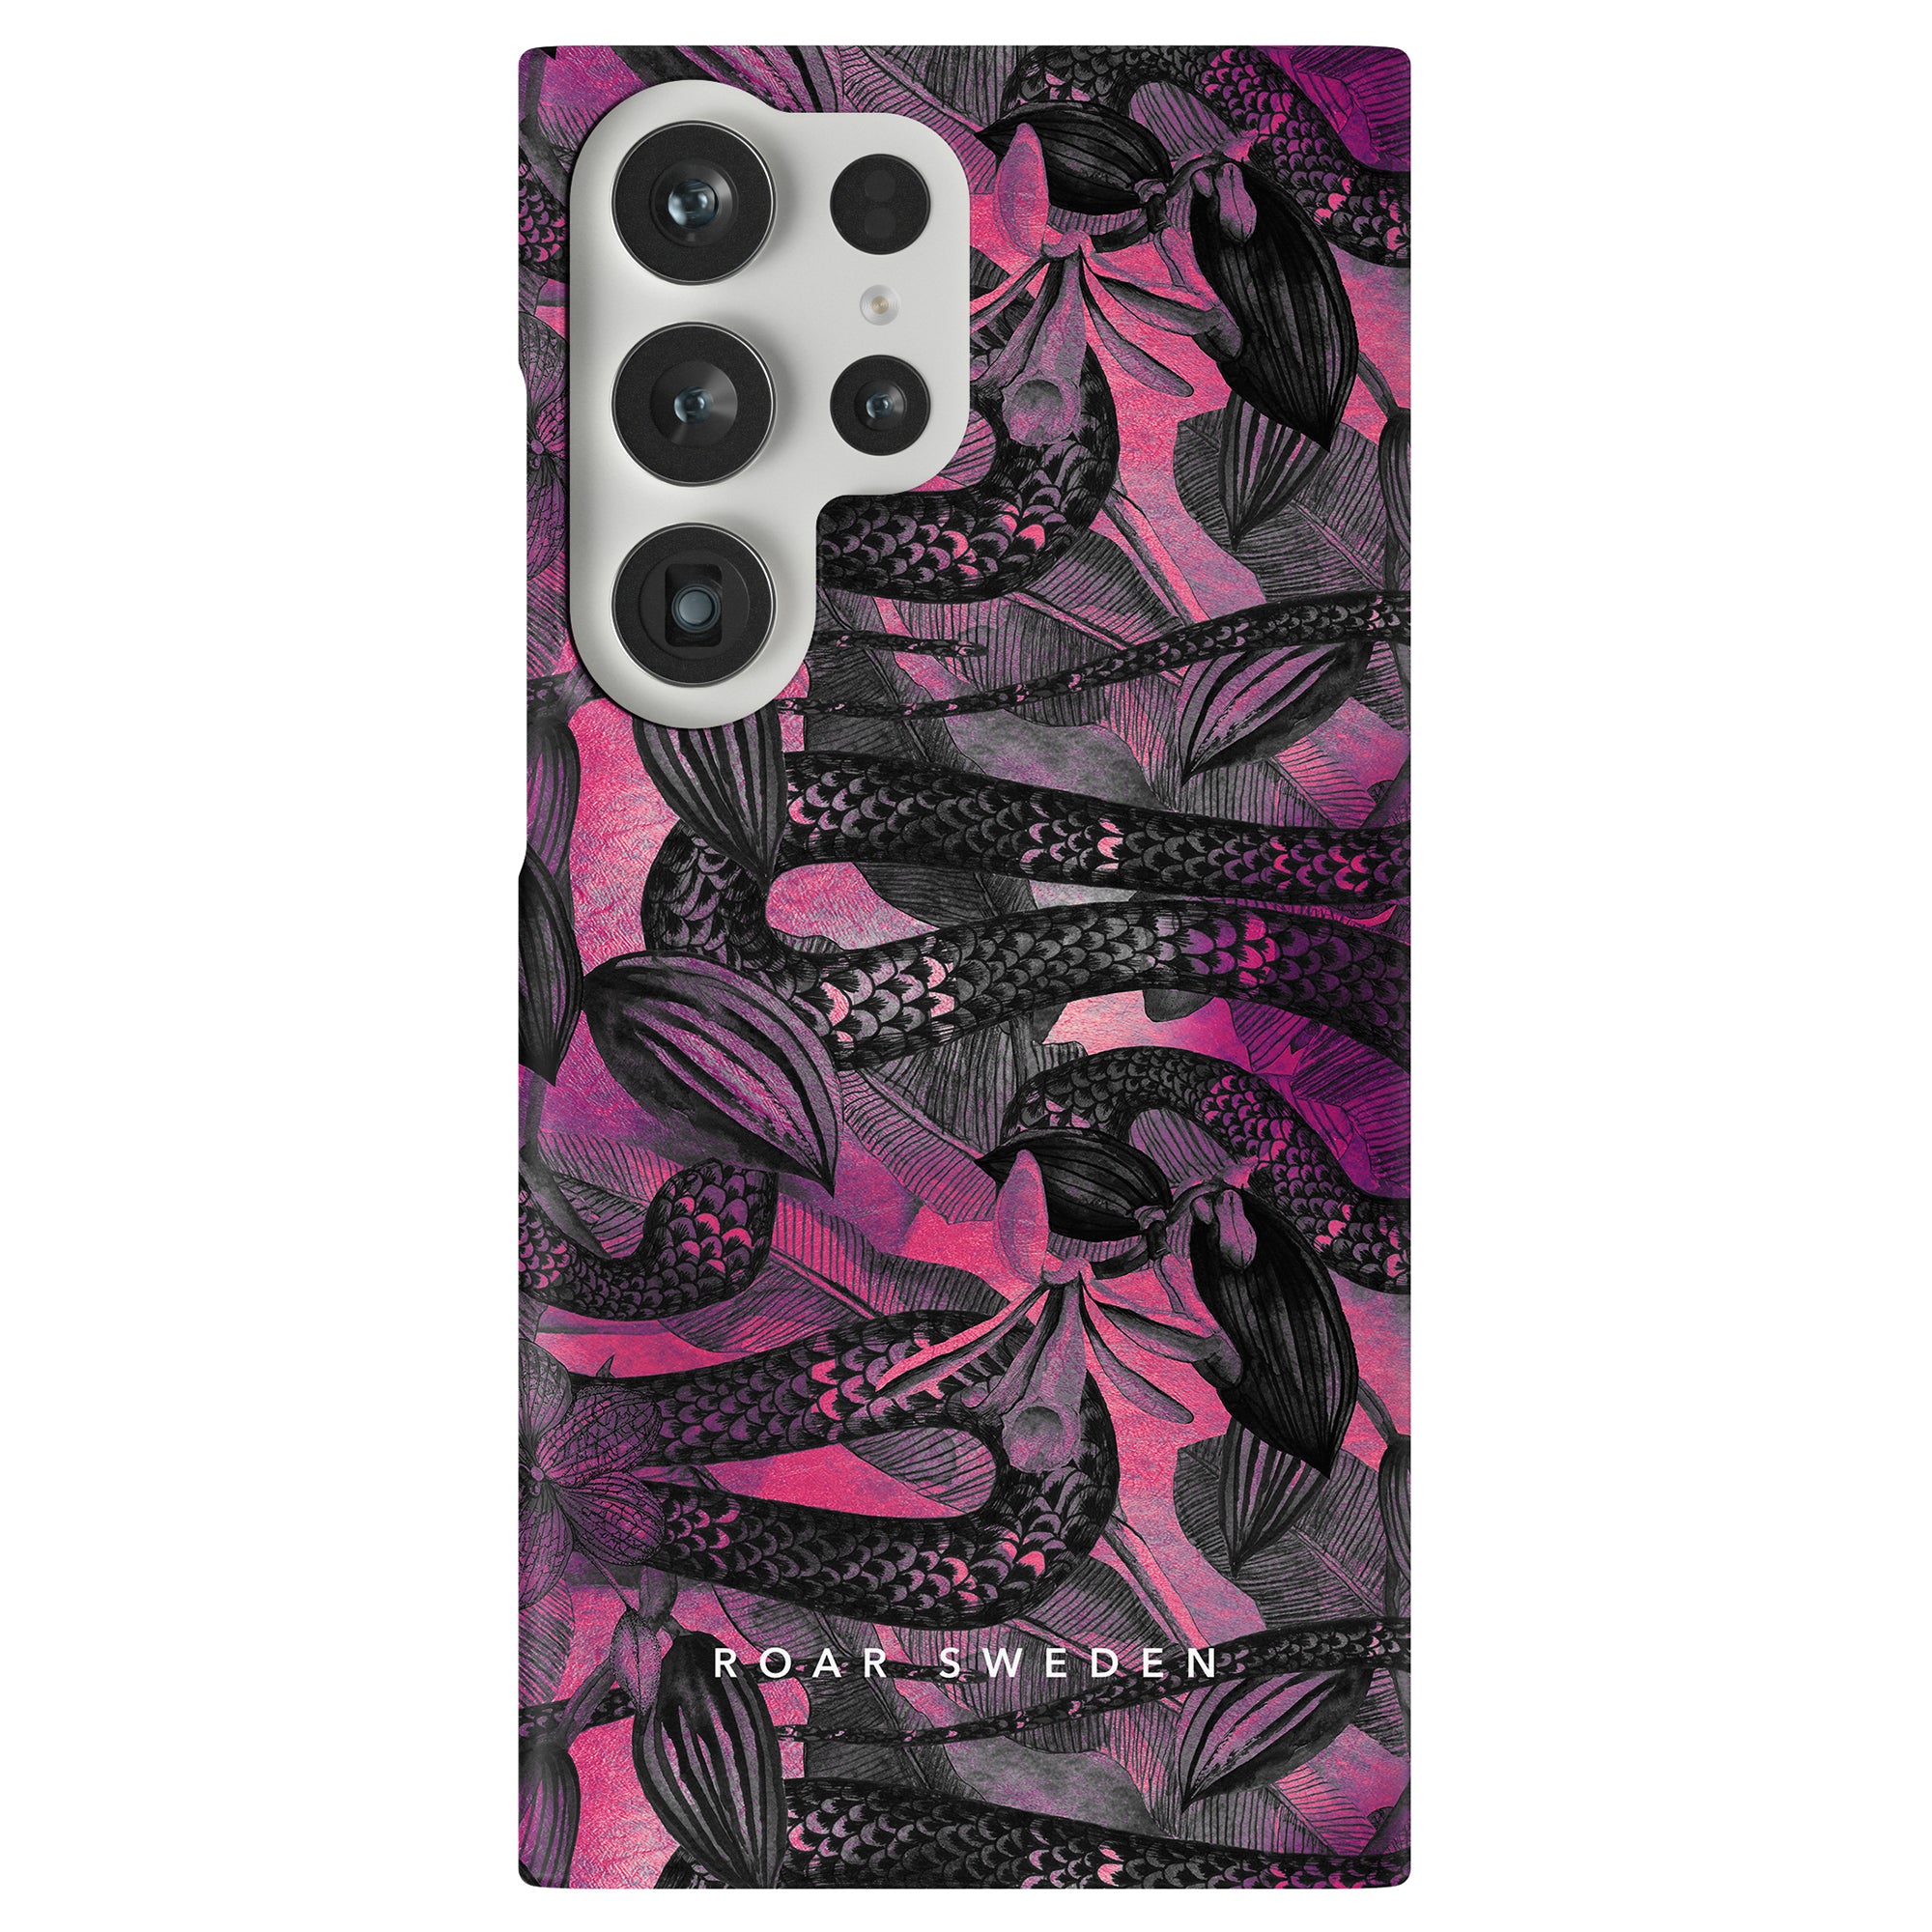 A vibrant Snake Nest - Slim case adorned with mermaids, featuring a captivating combination of pink and black hues.